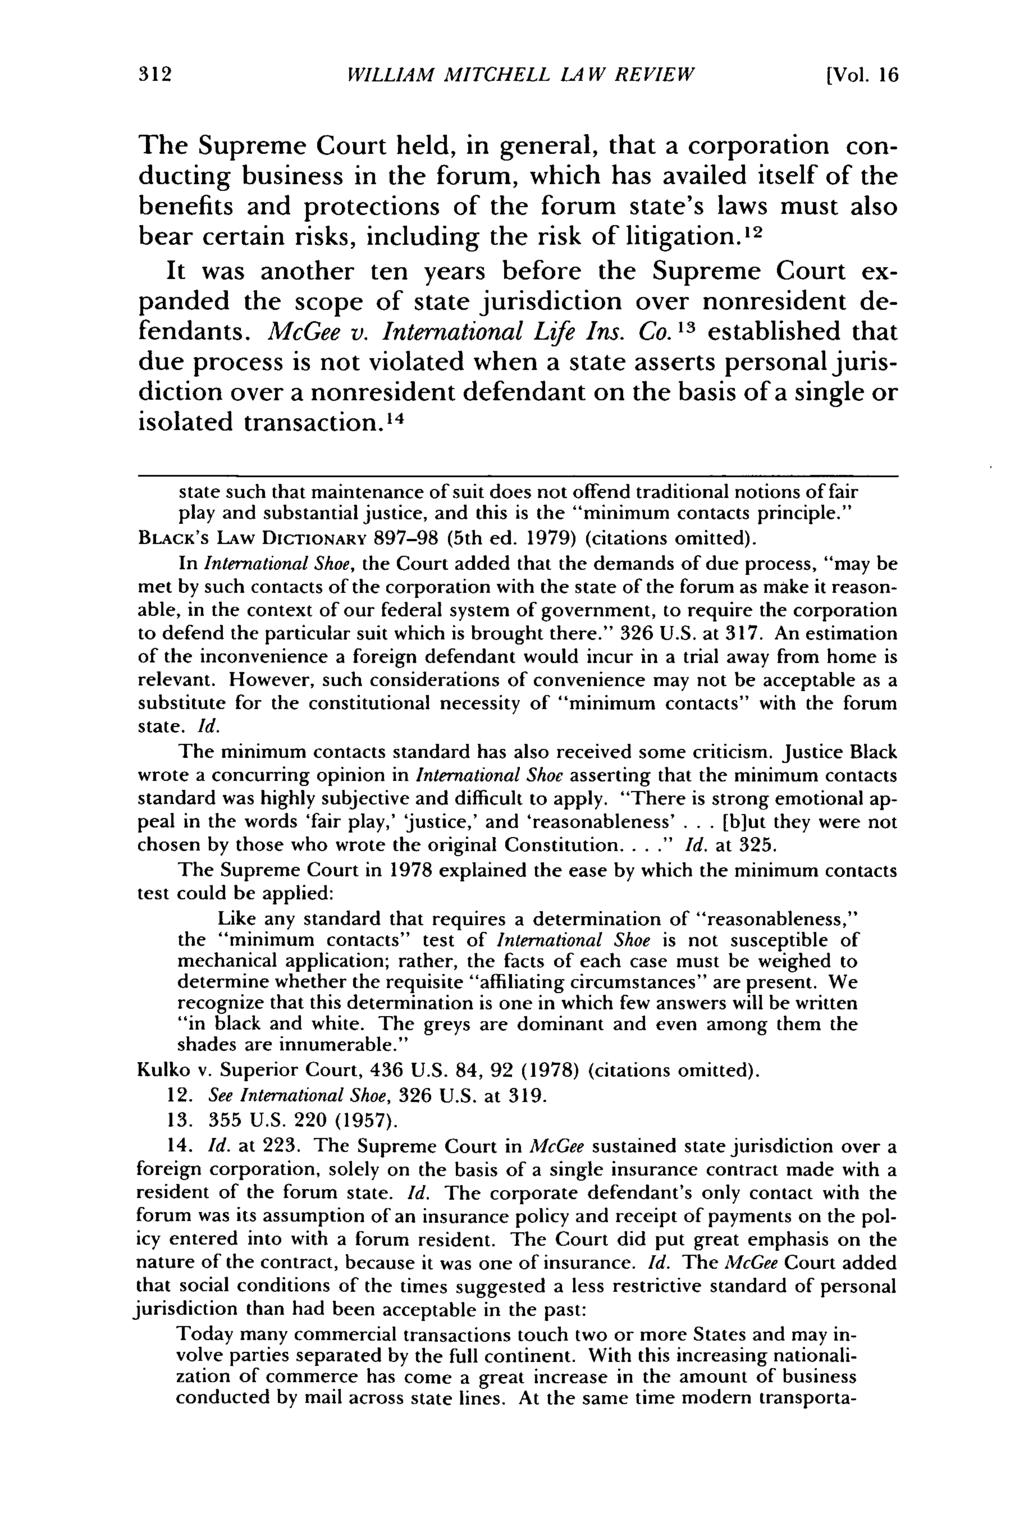 William Mitchell Law Review, Vol. 16, Iss. 1 [1990], Art. 7 WILLIAM MITCHELL LA W REVIEW [Vol.